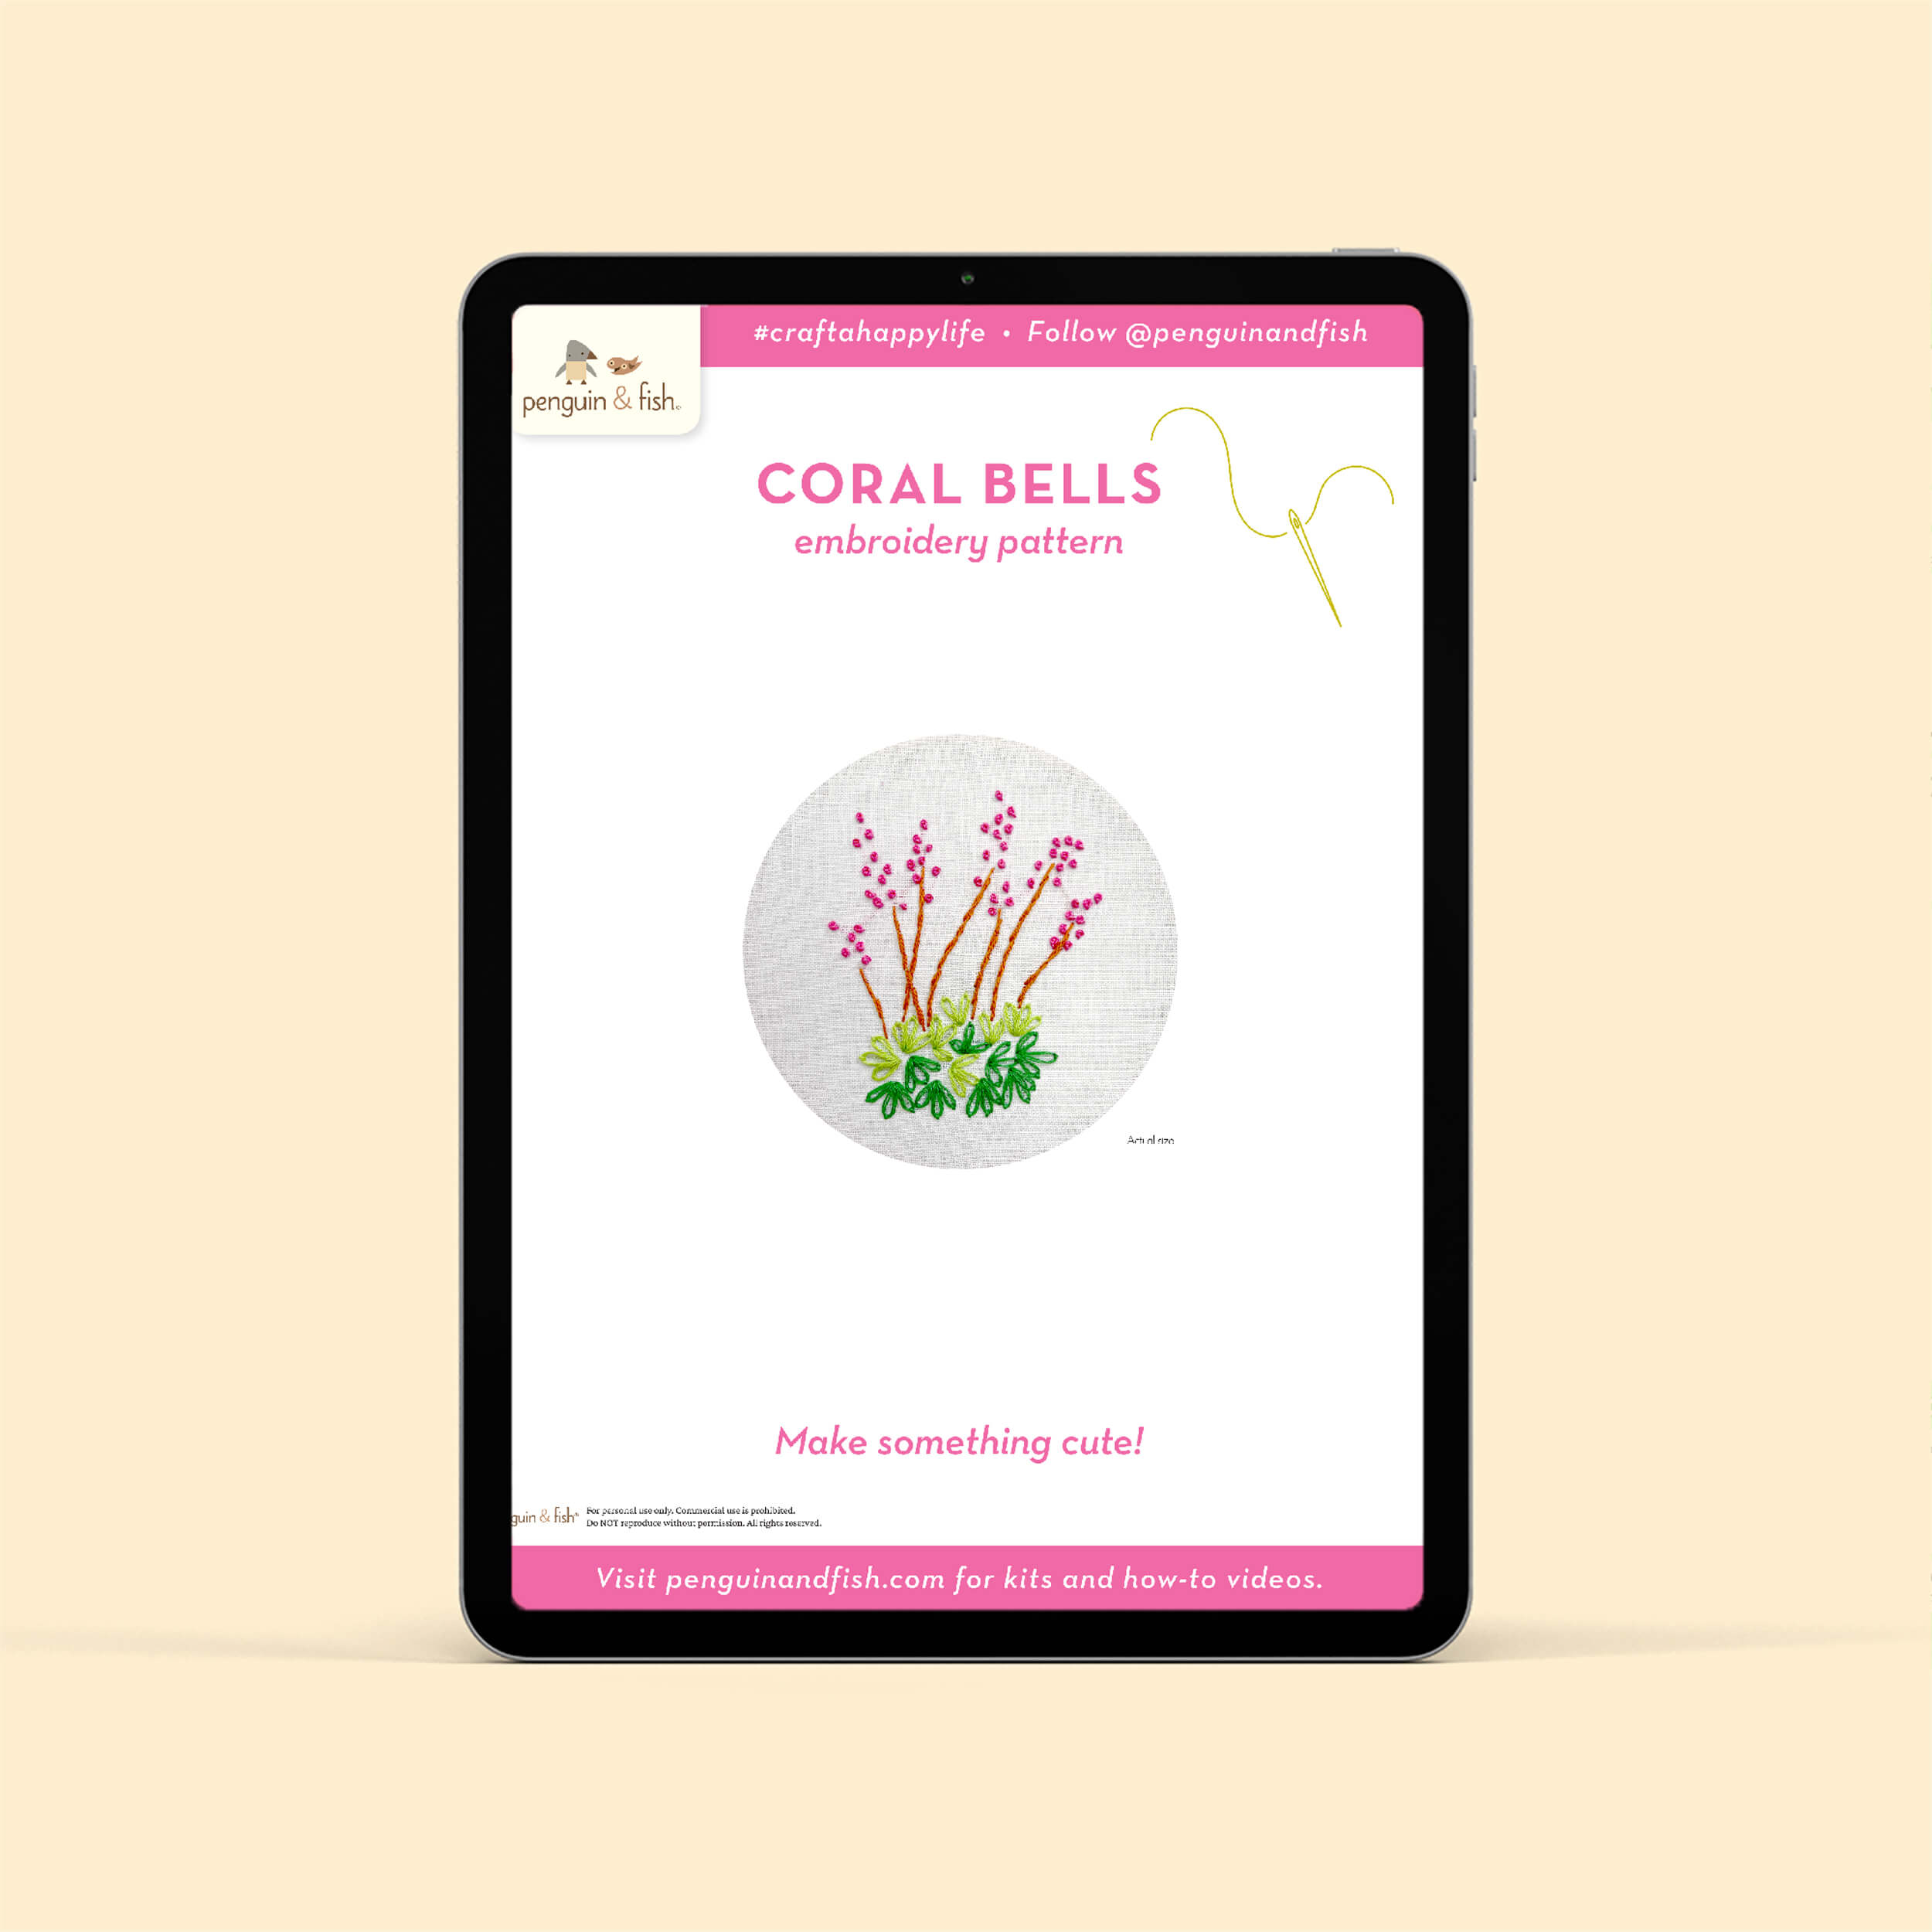 Coral Bells PDF embroidery pattern shown on a tablet